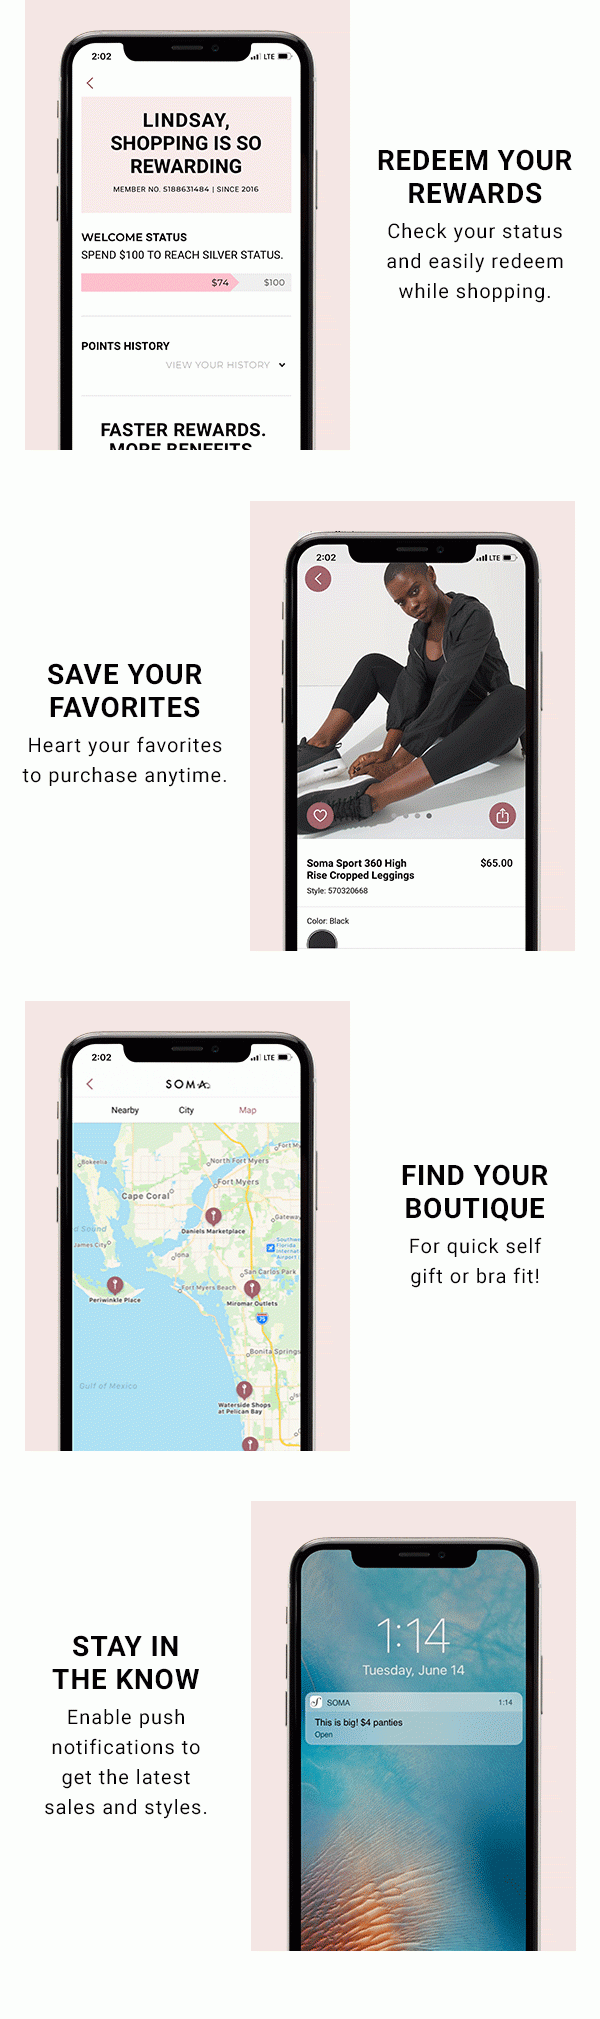 REDEEM YOUR REWARDS Check your status and easily redeem while shopping. SAVE YOUR FAVORITES Heart your favorites to purchase anytime. FIND YOUR BOUTIQUE For quick self gift or bra fit! STAY IN THE KNOW Enable push notifications to get the latest sales and styles. 